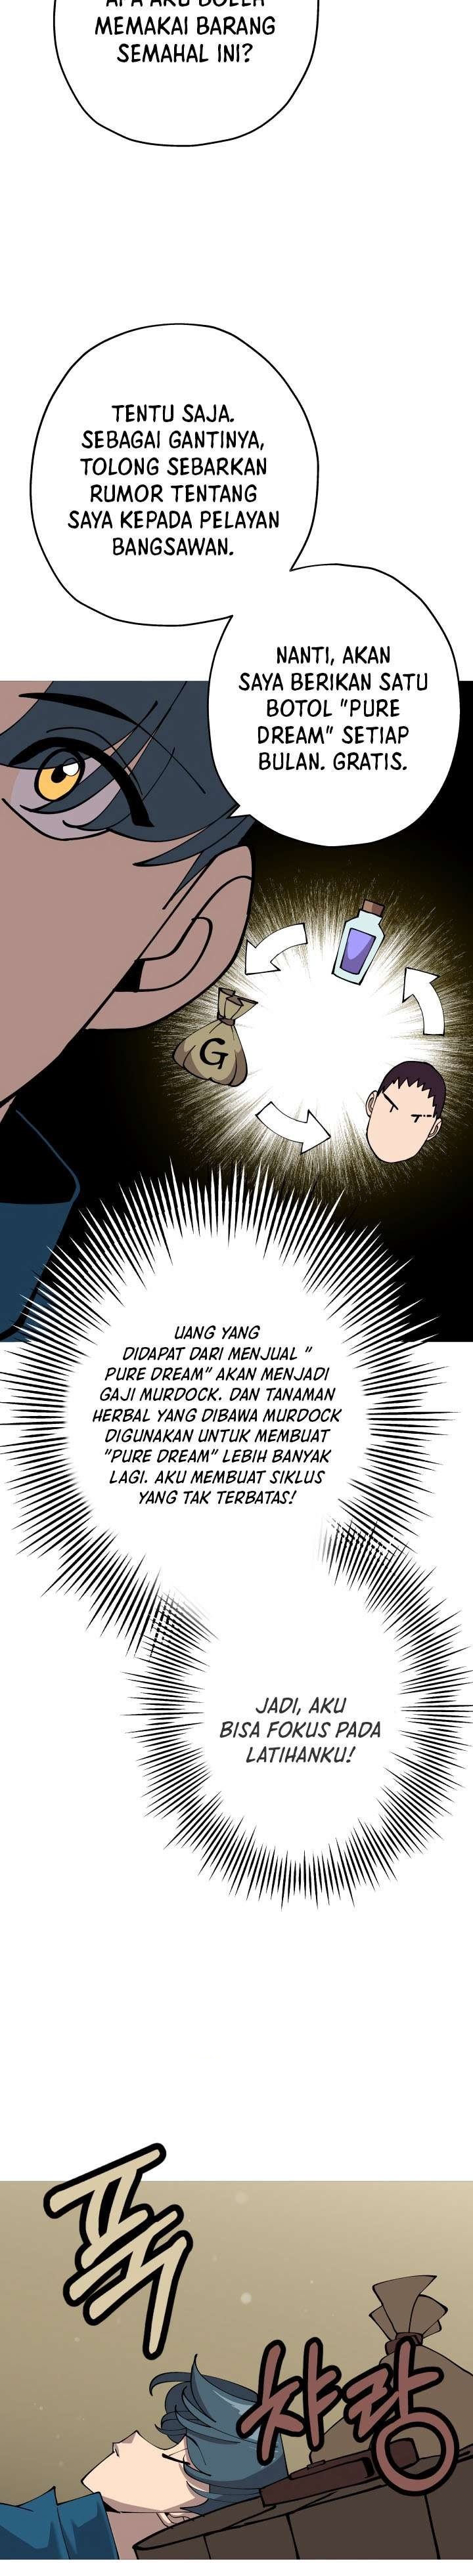 Dilarang COPAS - situs resmi www.mangacanblog.com - Komik the story of a low rank soldier becoming a monarch 026 - chapter 26 27 Indonesia the story of a low rank soldier becoming a monarch 026 - chapter 26 Terbaru 18|Baca Manga Komik Indonesia|Mangacan